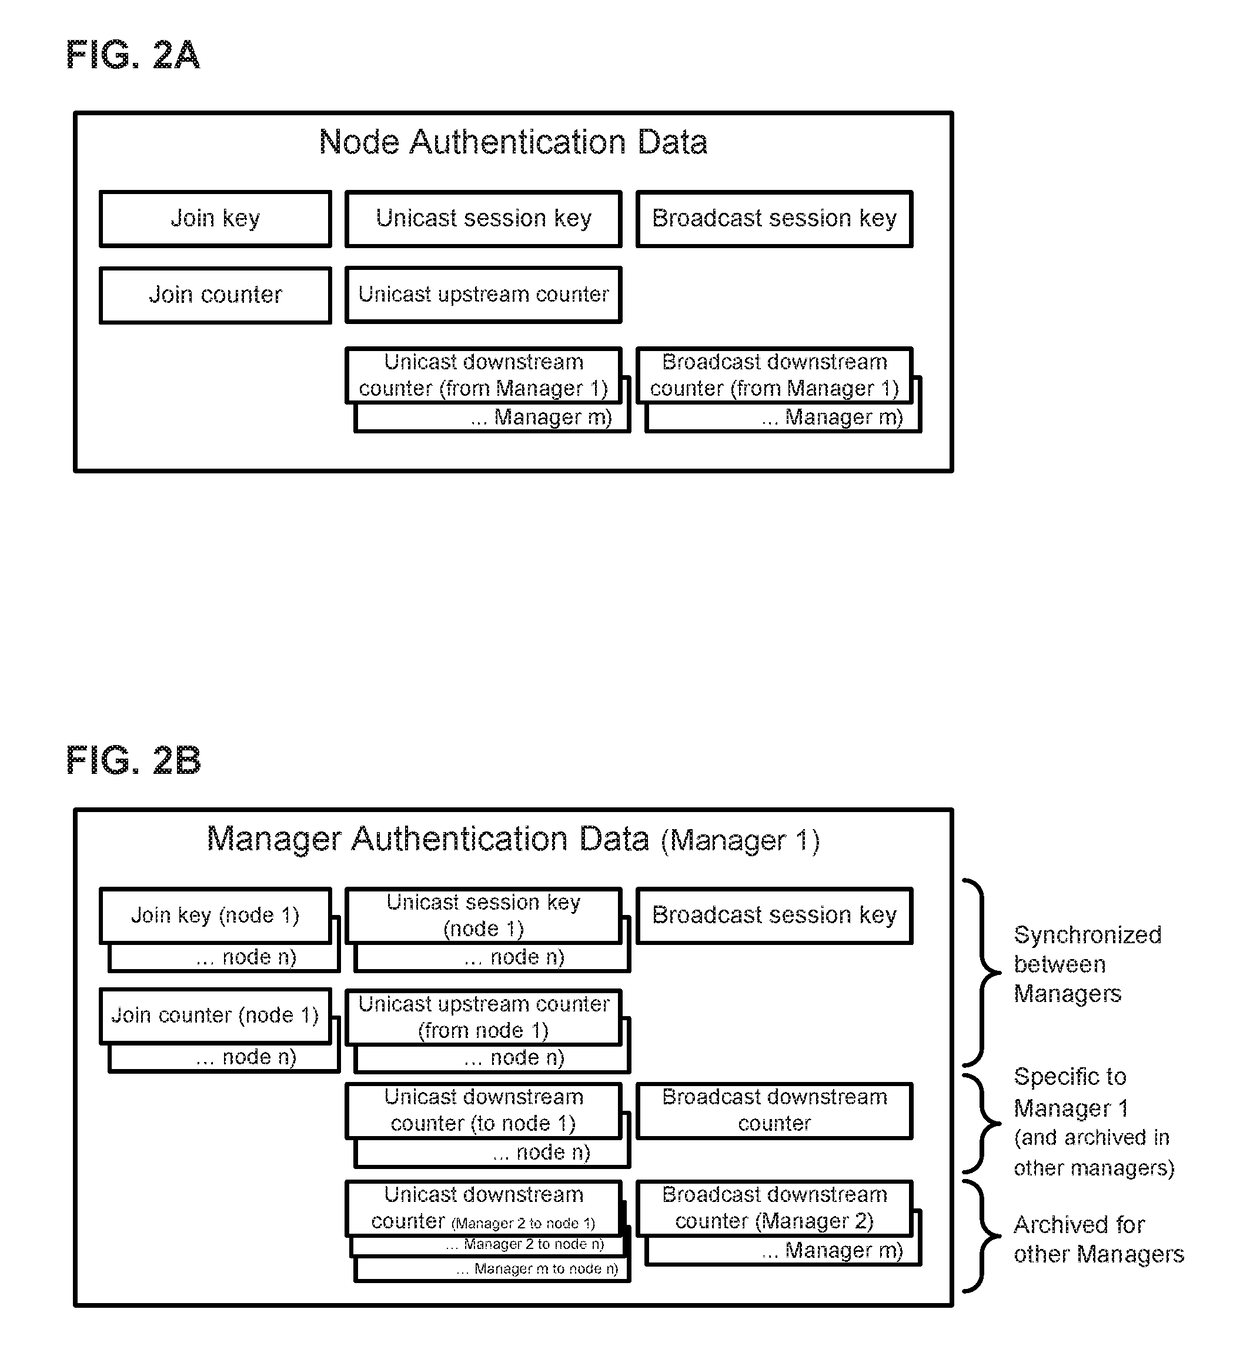 Disjoint security in wireless networks with multiple managers or access points